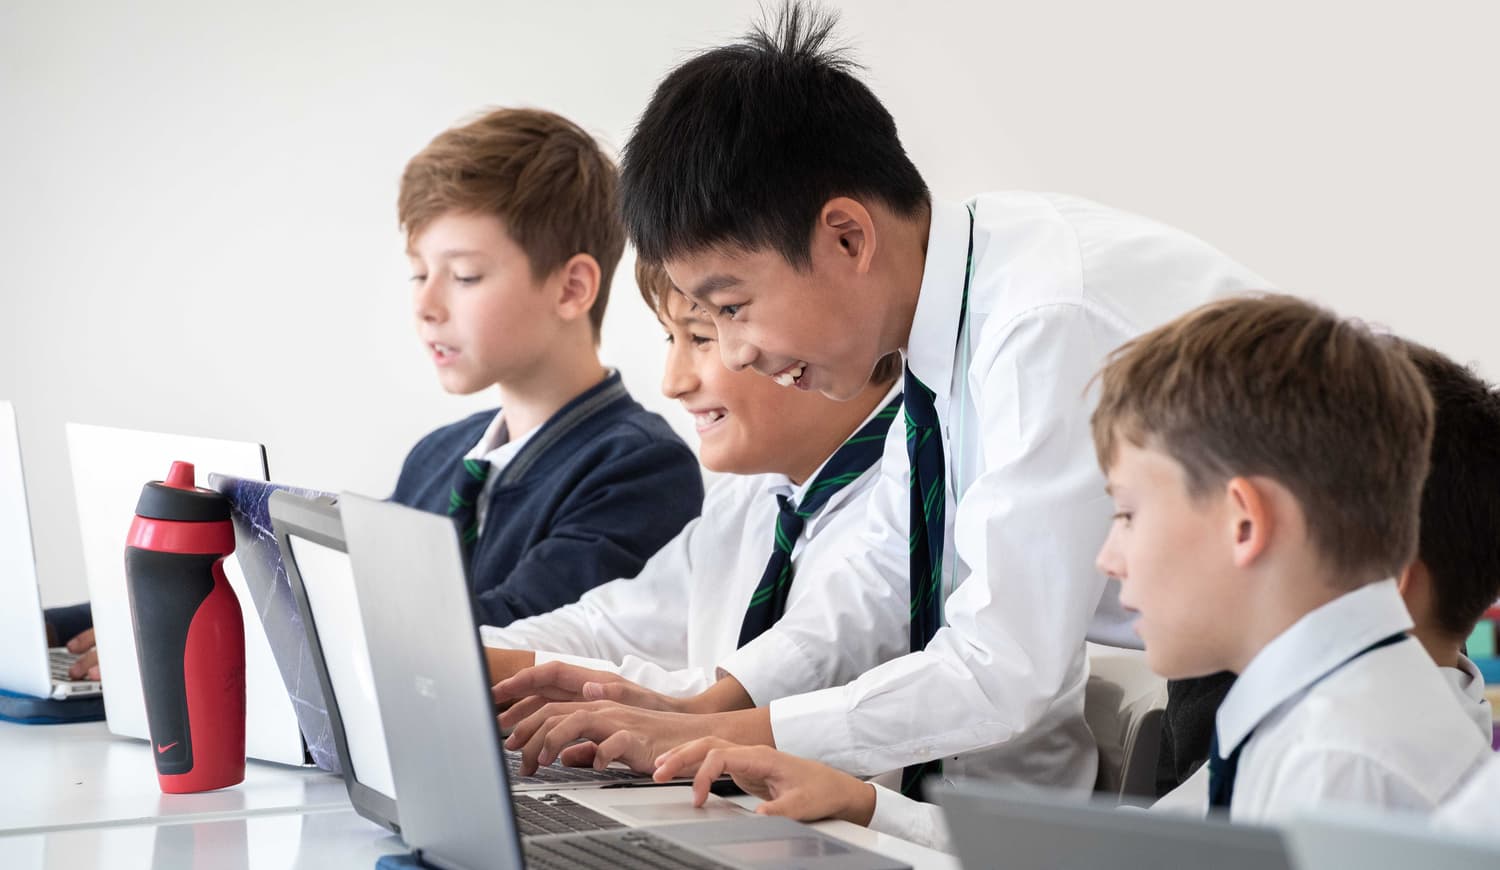 Students working with computers and smiling